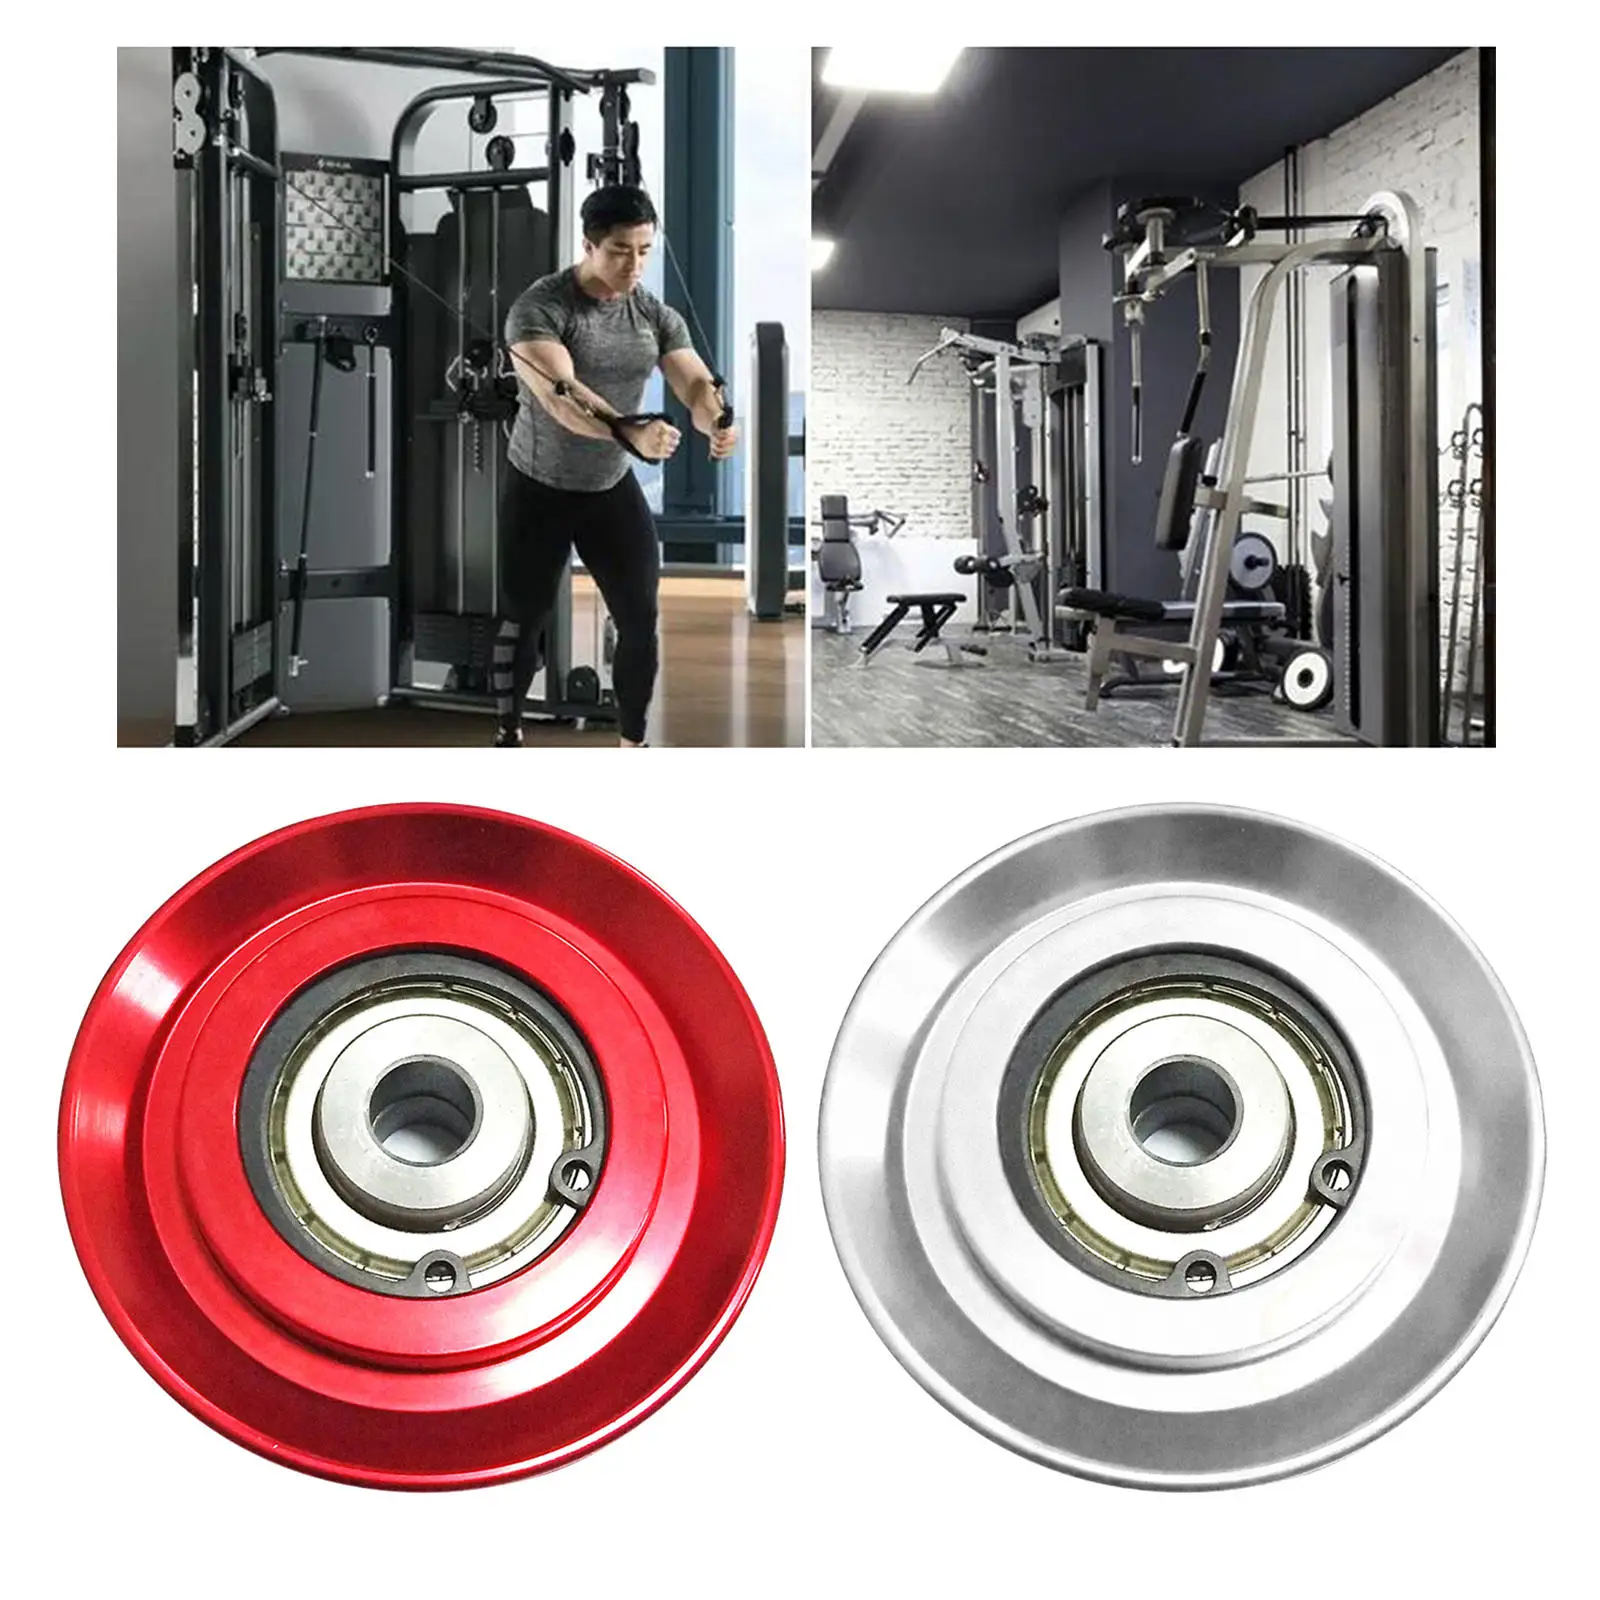 73mm Bearing Pulley Aluminium Alloy Universal for Fitness Equipment Replacement Part